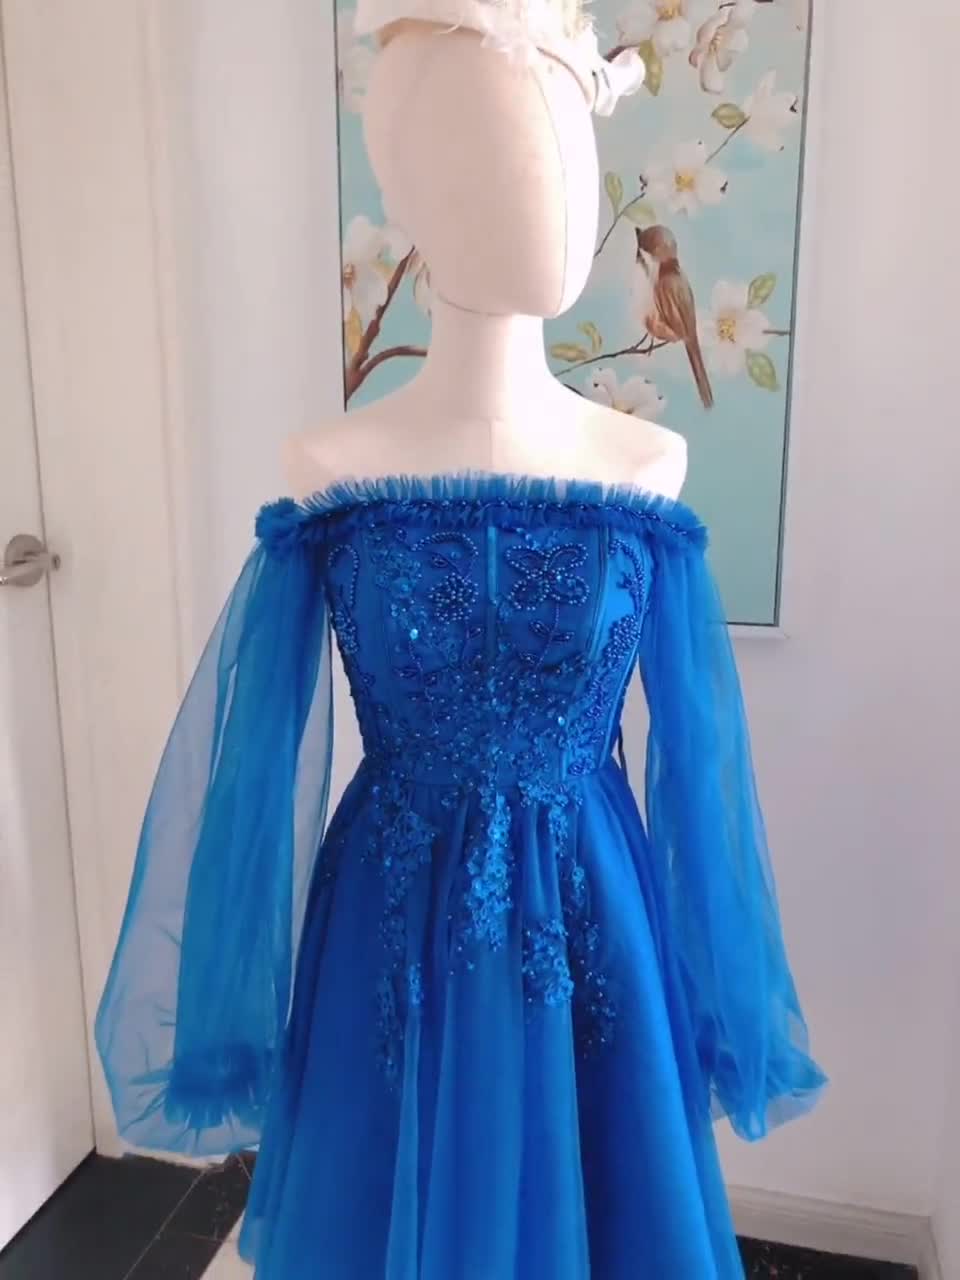 Royal Blue Off Shoulder Mermaid Blue Mermaid Prom Dress With Satin Peplum  Plus Size, Floor Length Formal Evening Gown For South African Parties From  Yateweddingdress, $118.6 | DHgate.Com